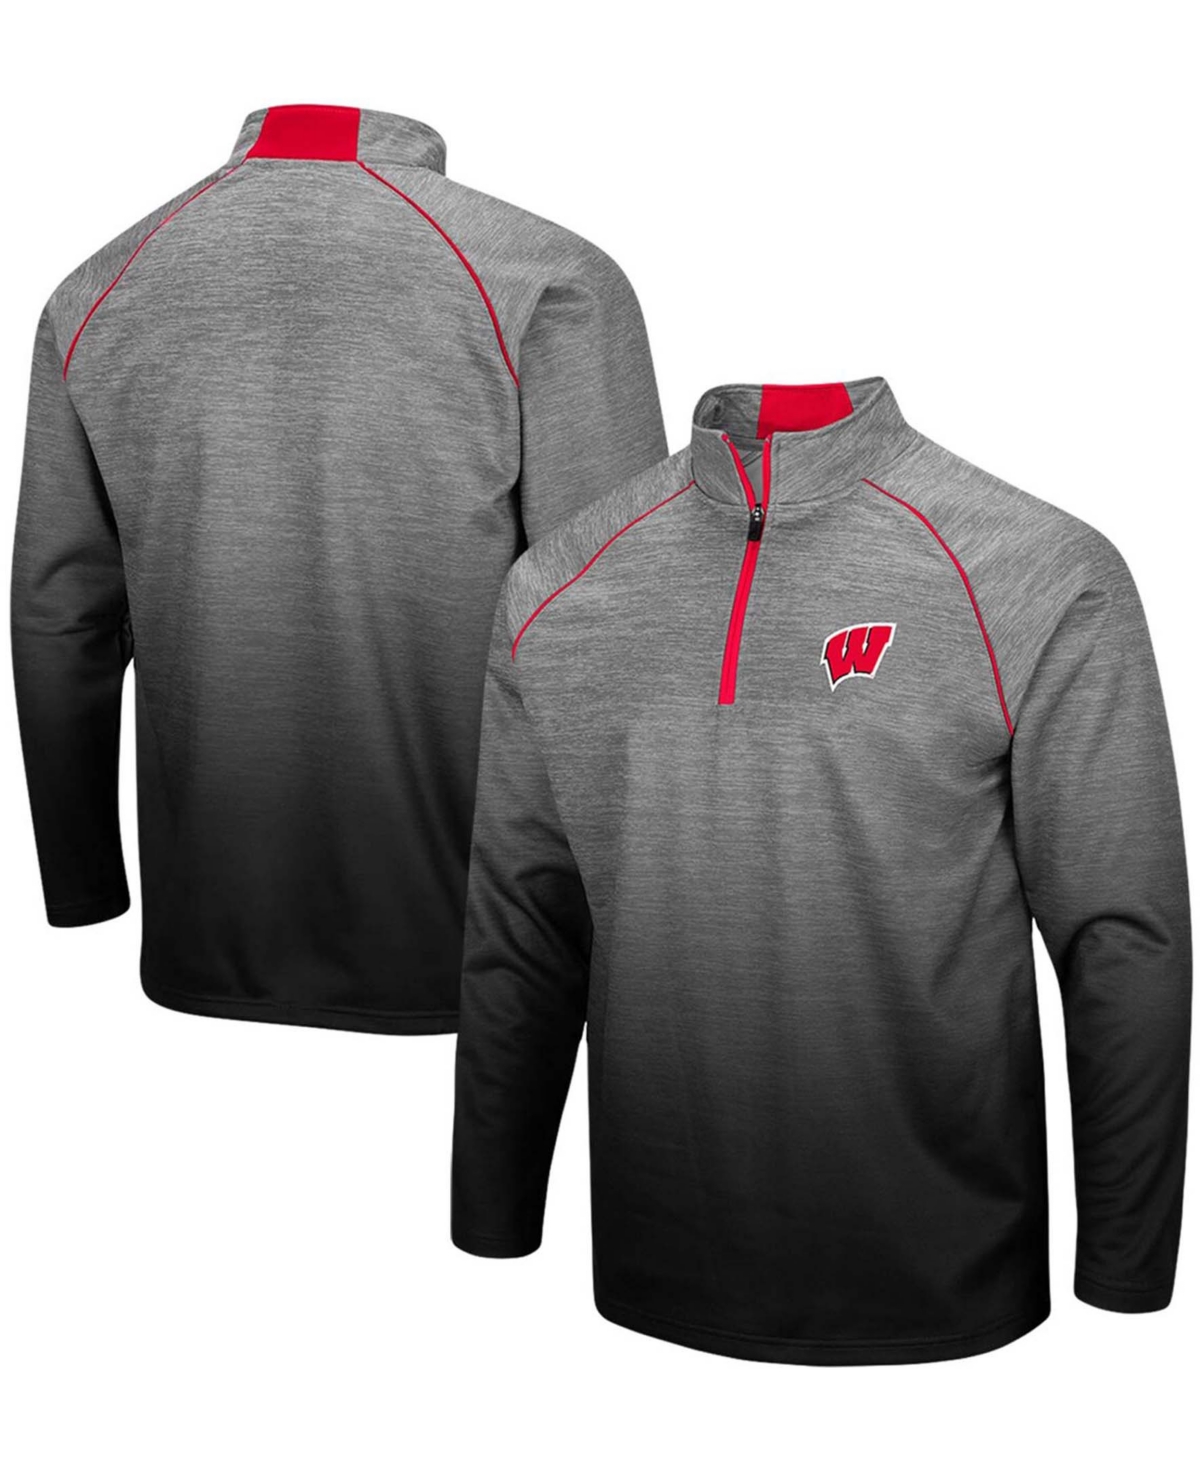 Colosseum Men's Heathered Gray Wisconsin Badgers Sitwell Sublimated Quarter-zip Pullover Jacket In Heather Gray